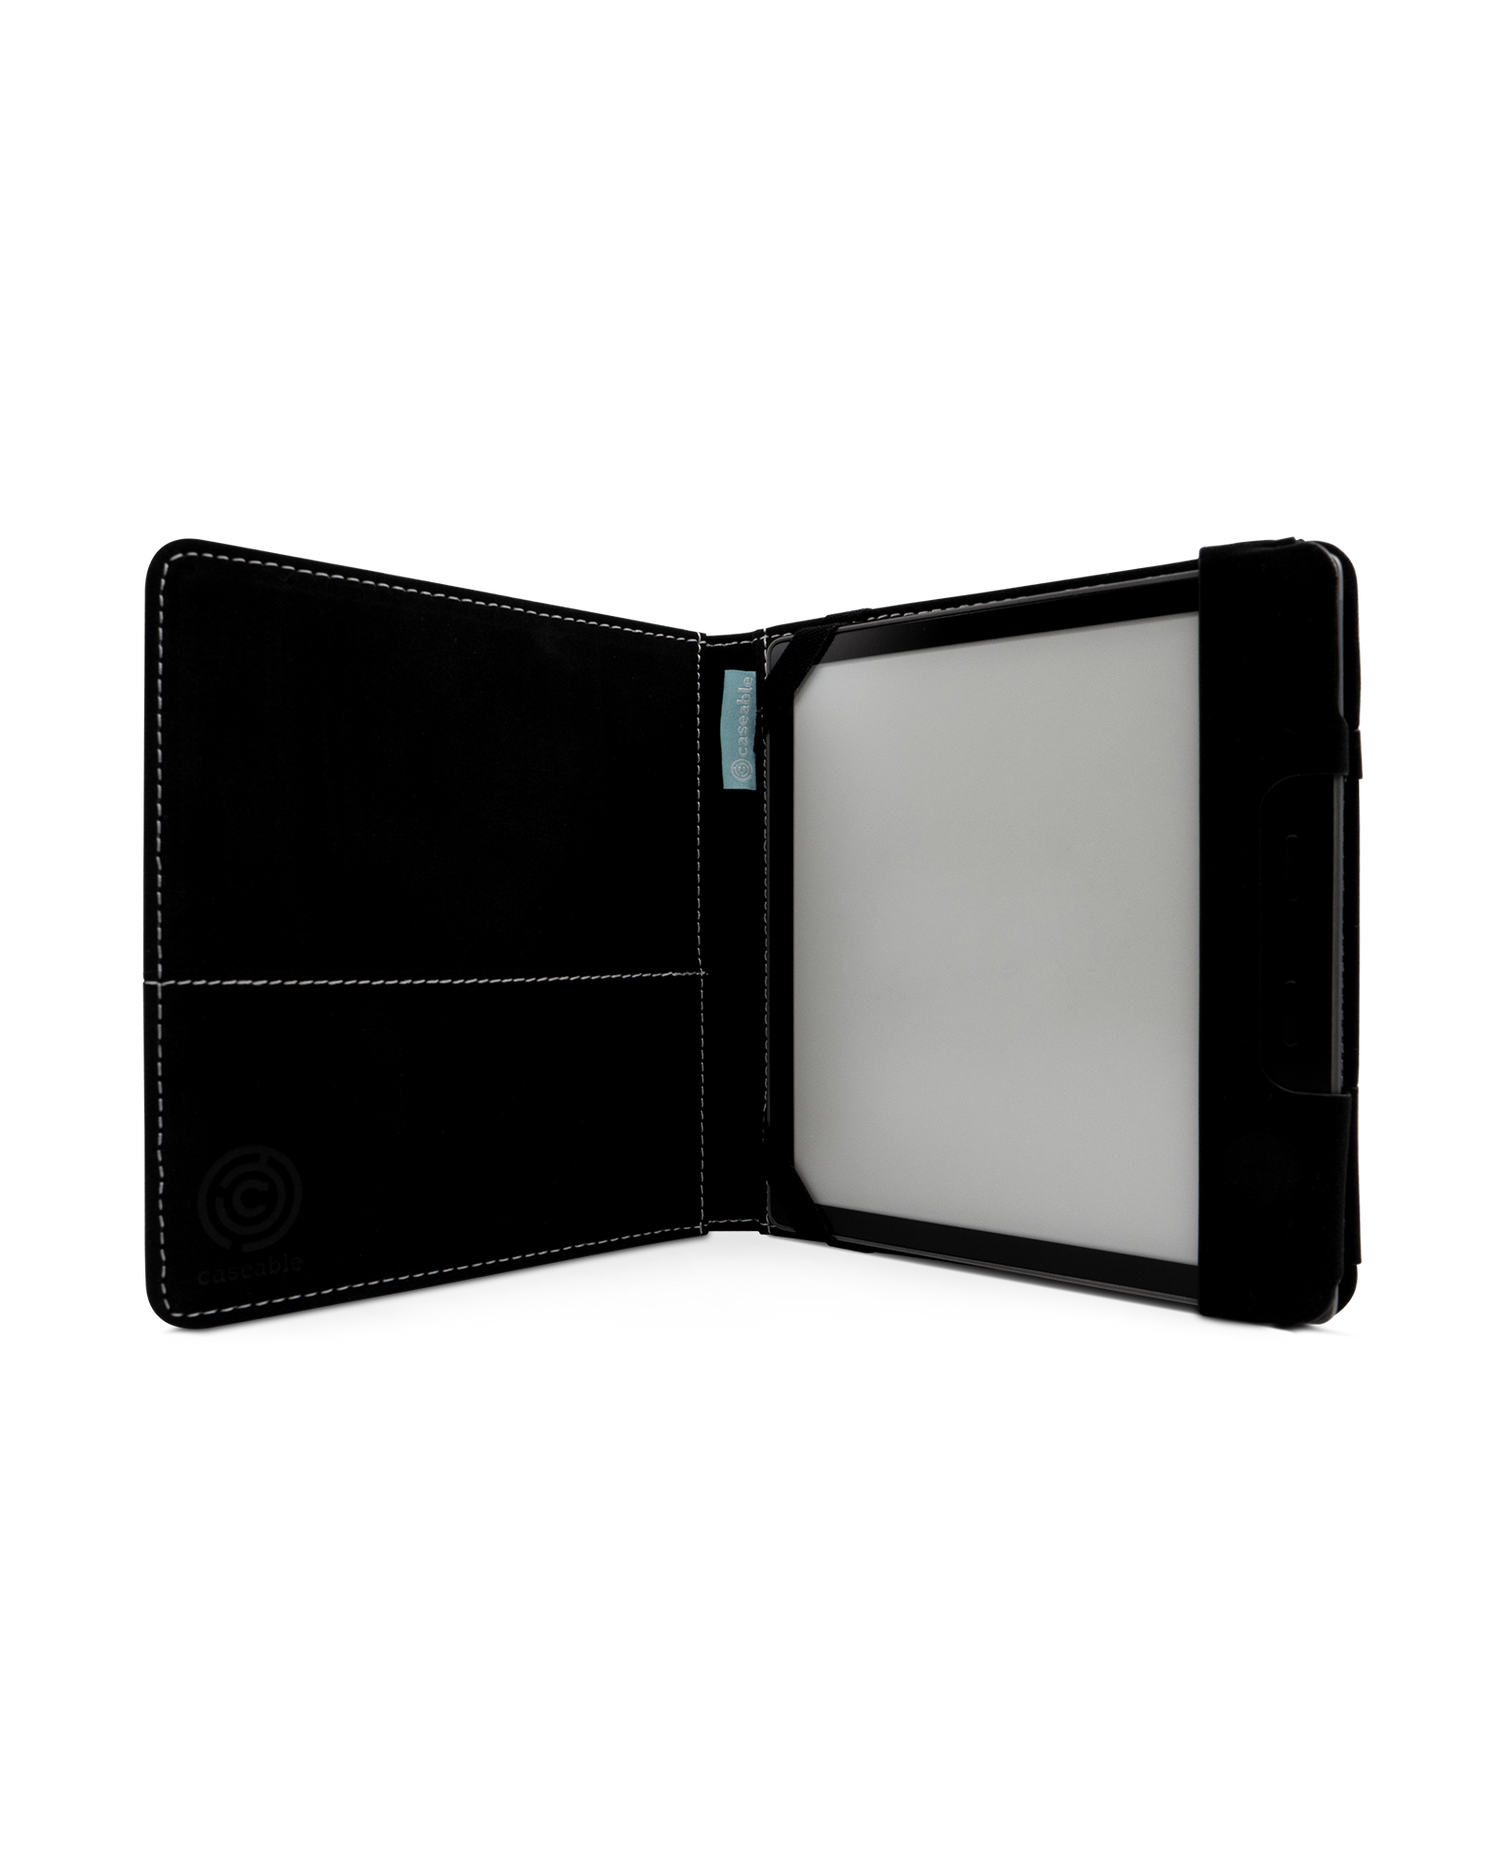 Midnight Floral eReader Case for tolino vision 6: Opened interior view